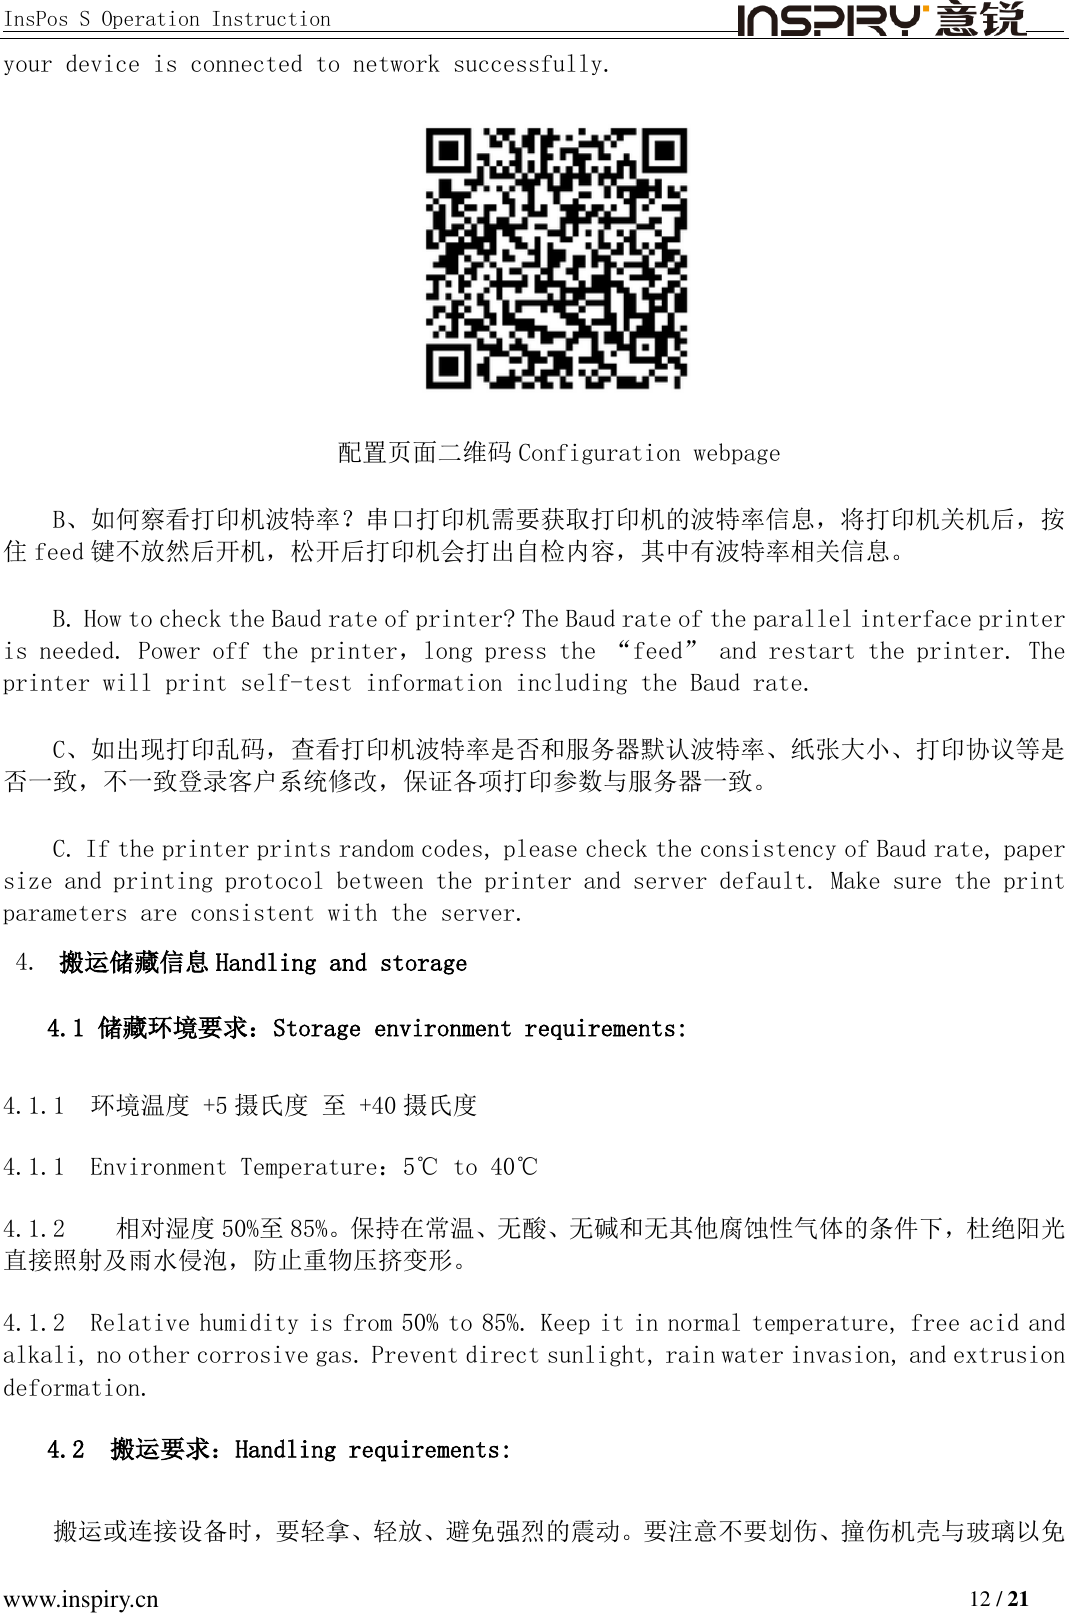 InsPos S Operation Instruction                                         www.inspiry.cn                                                                           12 / 21 your device is connected to network successfully.  配置页面二维码 Configuration webpage B、如何察看打印机波特率？串口打印机需要获取打印机的波特率信息，将打印机关机后，按住feed 键不放然后开机，松开后打印机会打出自检内容，其中有波特率相关信息。 B. How to check the Baud rate of printer? The Baud rate of the parallel interface printer is needed. Power off the printer，long press the “feed” and restart the printer. The printer will print self-test information including the Baud rate.  C、如出现打印乱码，查看打印机波特率是否和服务器默认波特率、纸张大小、打印协议等是否一致，不一致登录客户系统修改，保证各项打印参数与服务器一致。 C. If the printer prints random codes, please check the consistency of Baud rate, paper size and printing protocol between the printer and server default. Make sure the print parameters are consistent with the server.  4. 搬运储藏信息 Handling and storage 4.1 储藏环境要求：Storage environment requirements: 4.1.1 环境温度 +5 摄氏度 至 +40 摄氏度 4.1.1  Environment Temperature：5℃ to 40℃ 4.1.2   相对湿度 50%至85%。保持在常温、无酸、无碱和无其他腐蚀性气体的条件下，杜绝阳光直接照射及雨水侵泡，防止重物压挤变形。 4.1.2  Relative humidity is from 50% to 85%. Keep it in normal temperature, free acid and alkali, no other corrosive gas. Prevent direct sunlight, rain water invasion, and extrusion deformation.  4.2  搬运要求：Handling requirements: 搬运或连接设备时，要轻拿、轻放、避免强烈的震动。要注意不要划伤、撞伤机壳与玻璃以免